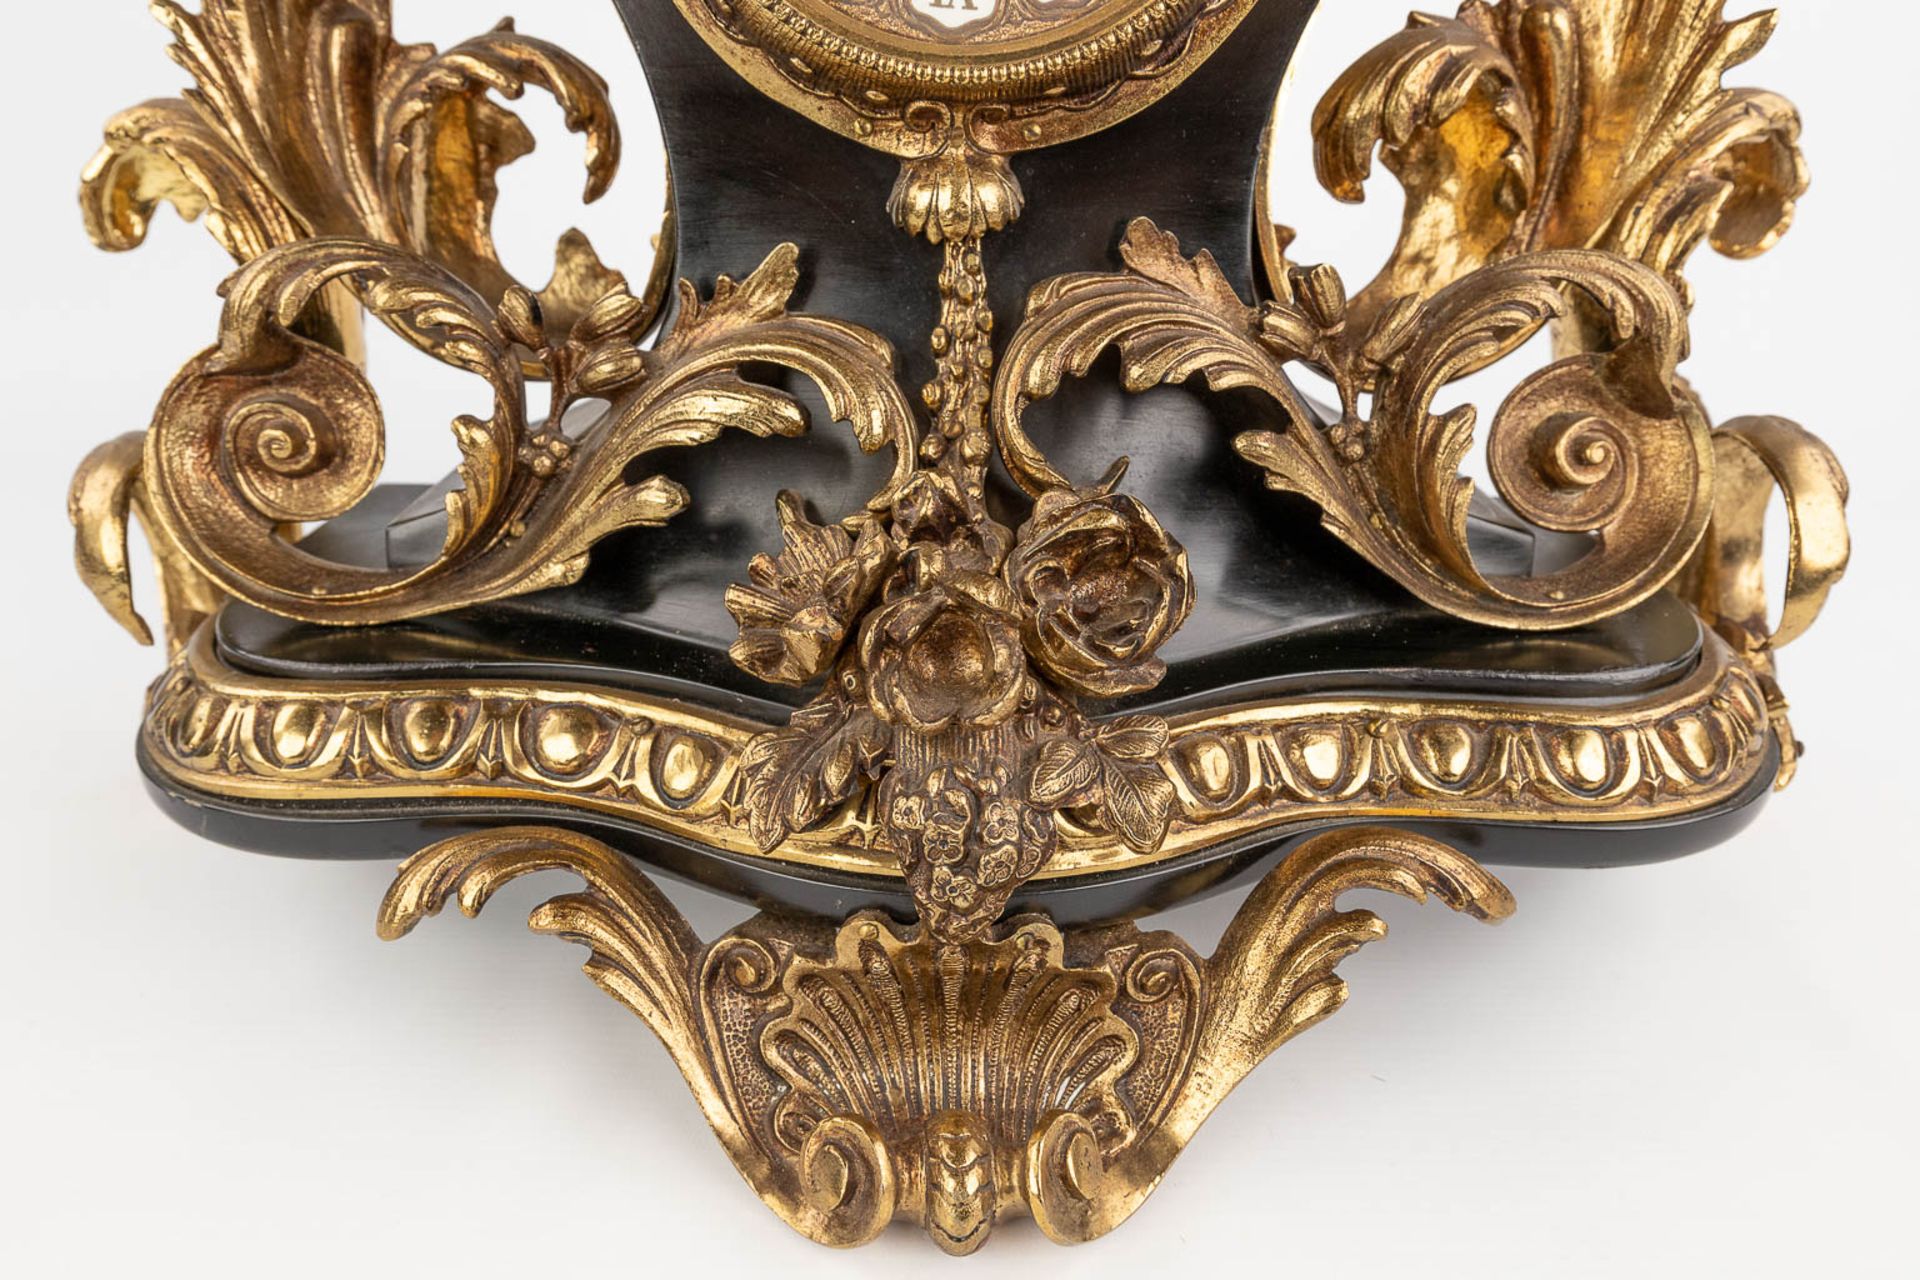 A three-piece mantle garniture clock and candelabra, Louis XV style. Circa 1970. (D:25 x W:51 x H:55 - Image 9 of 14